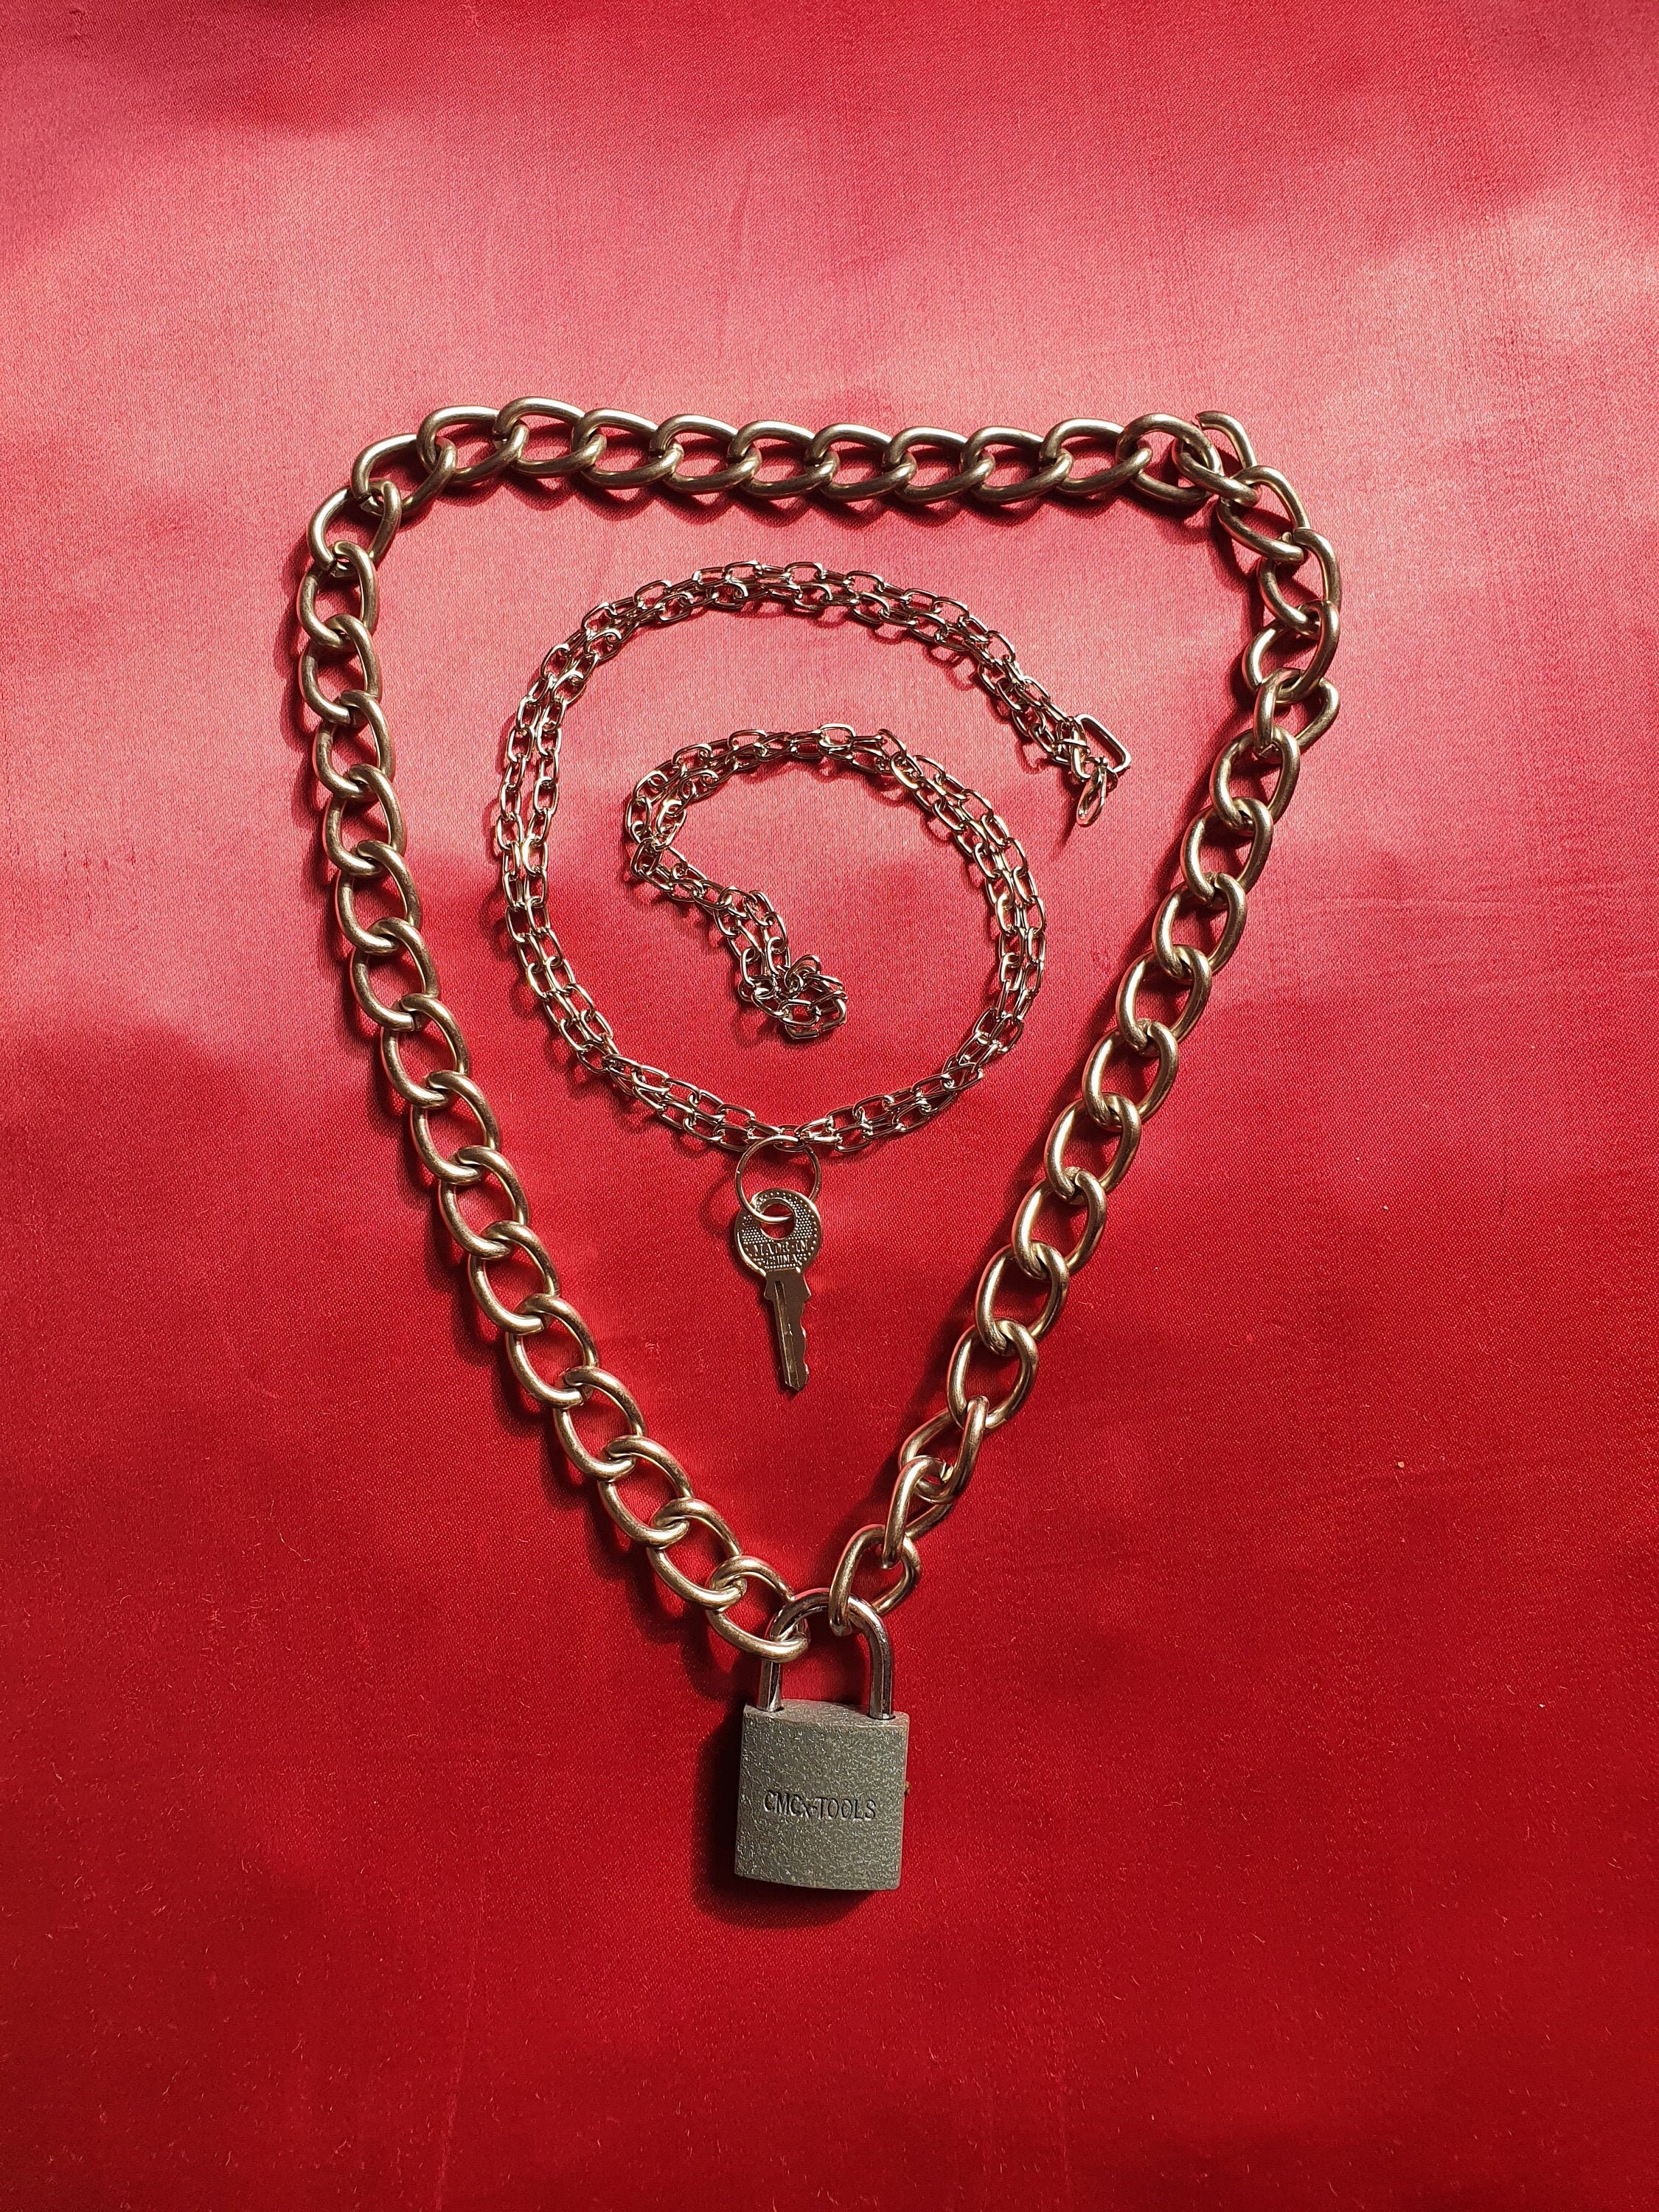 Stainless Steel Double Layer Key Lock Necklace Punk Link Chain